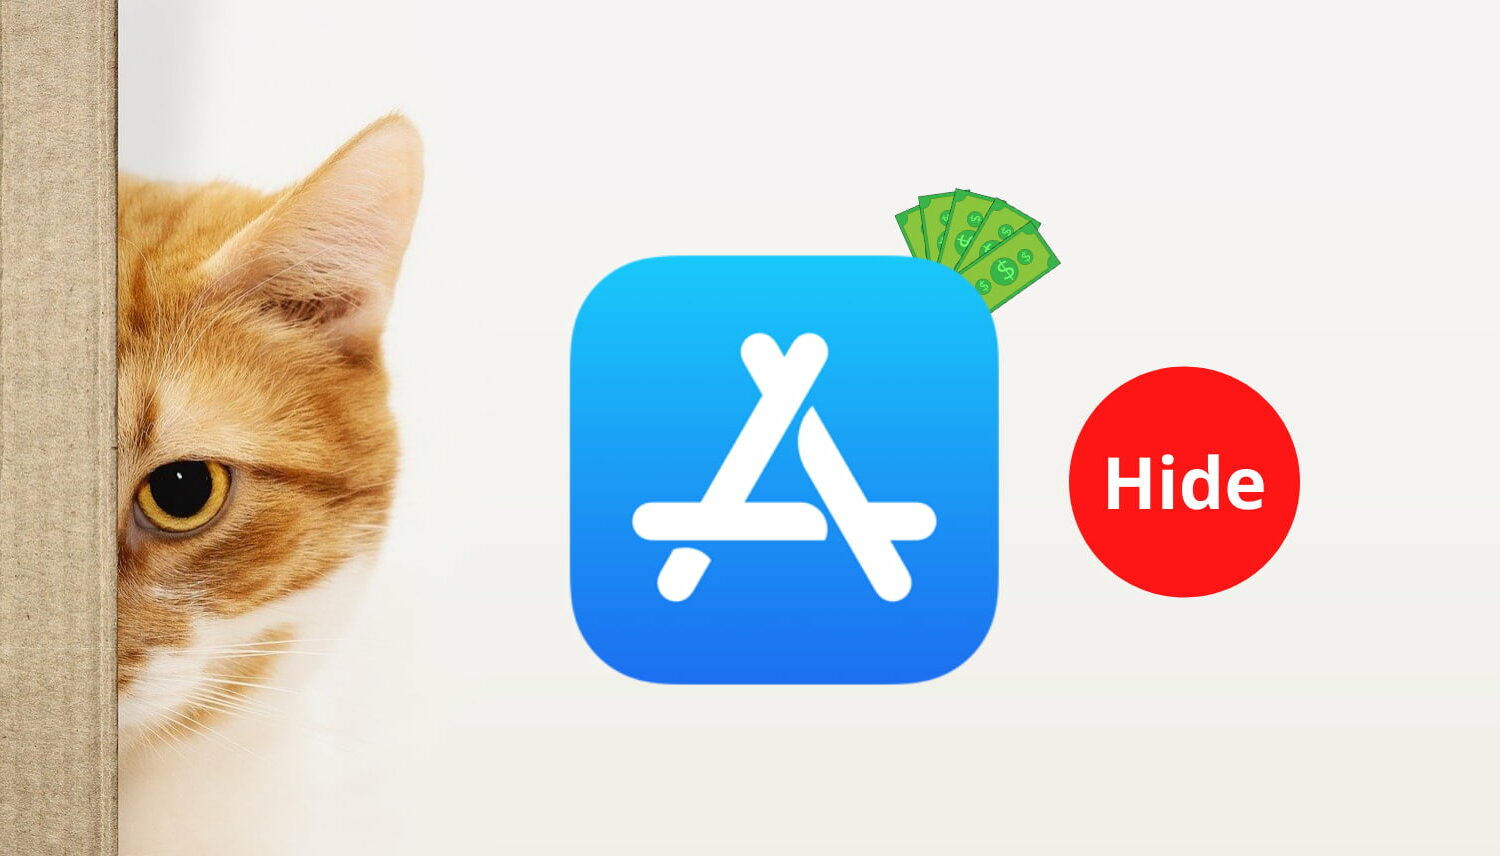 App Store icon and a red dot with word "Hide" and a cat hiding behind a cardboard